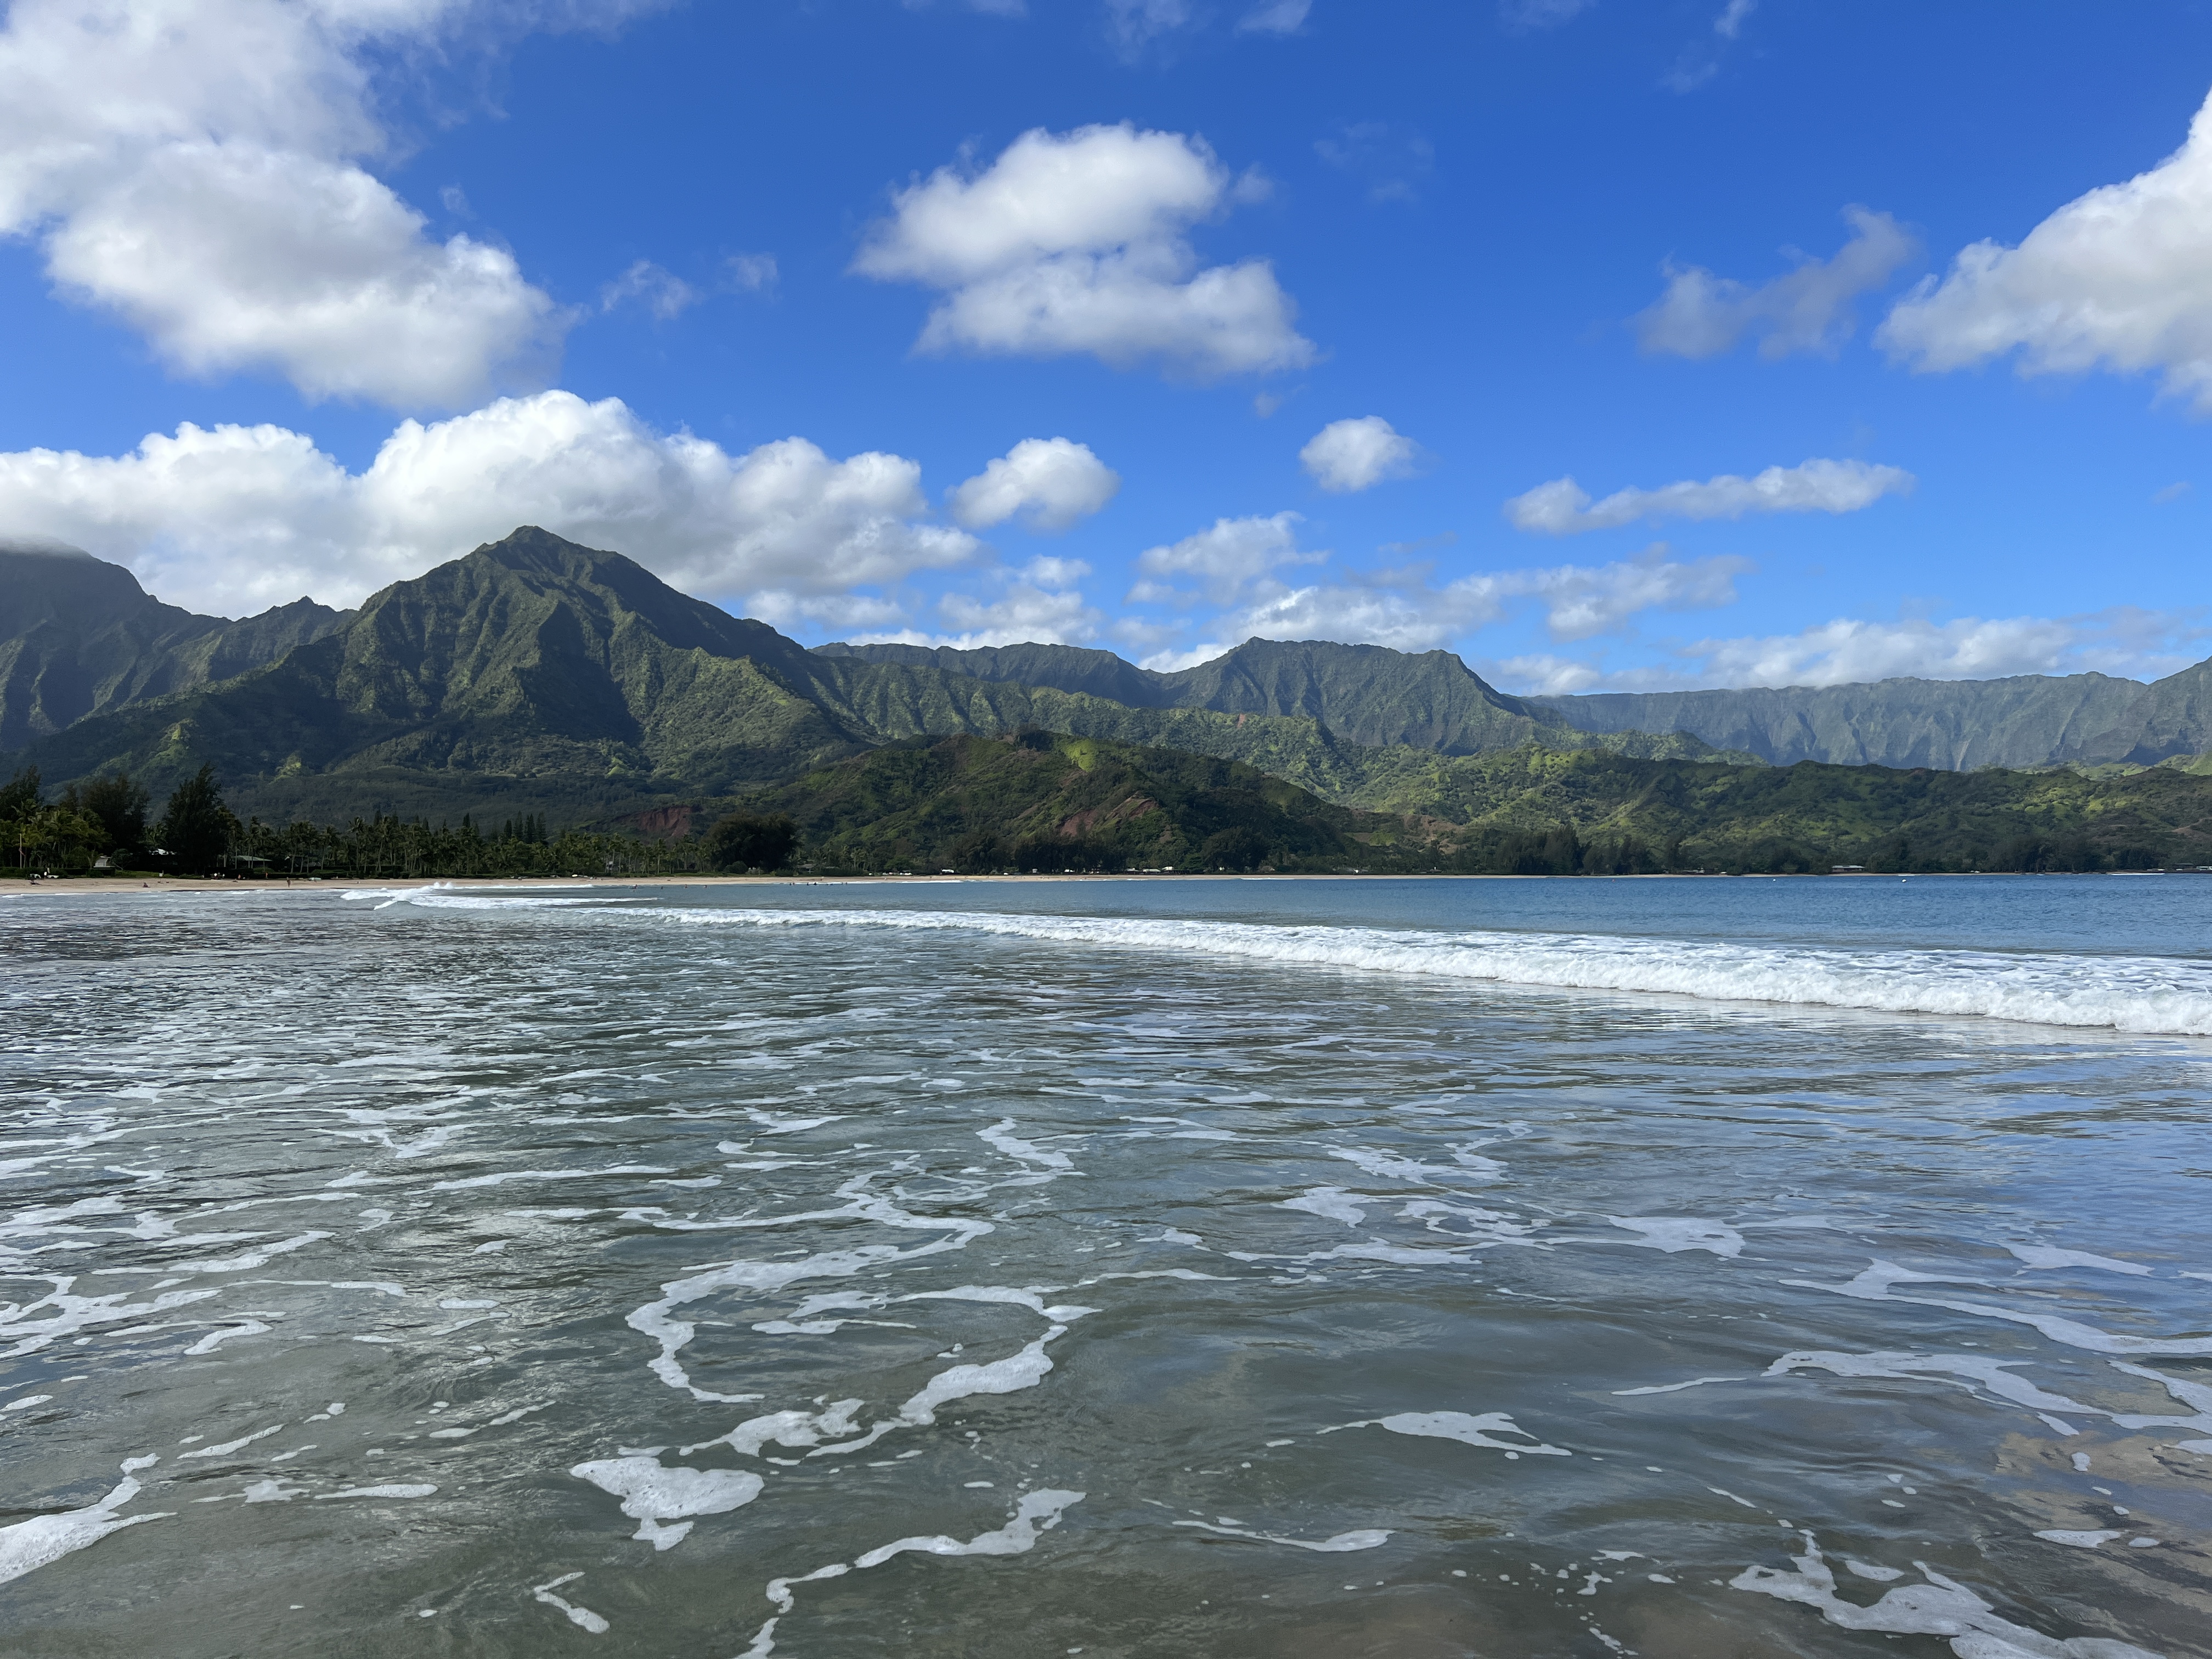 A list of what to do on Kauai in Hawaii to have an amazing vacation.